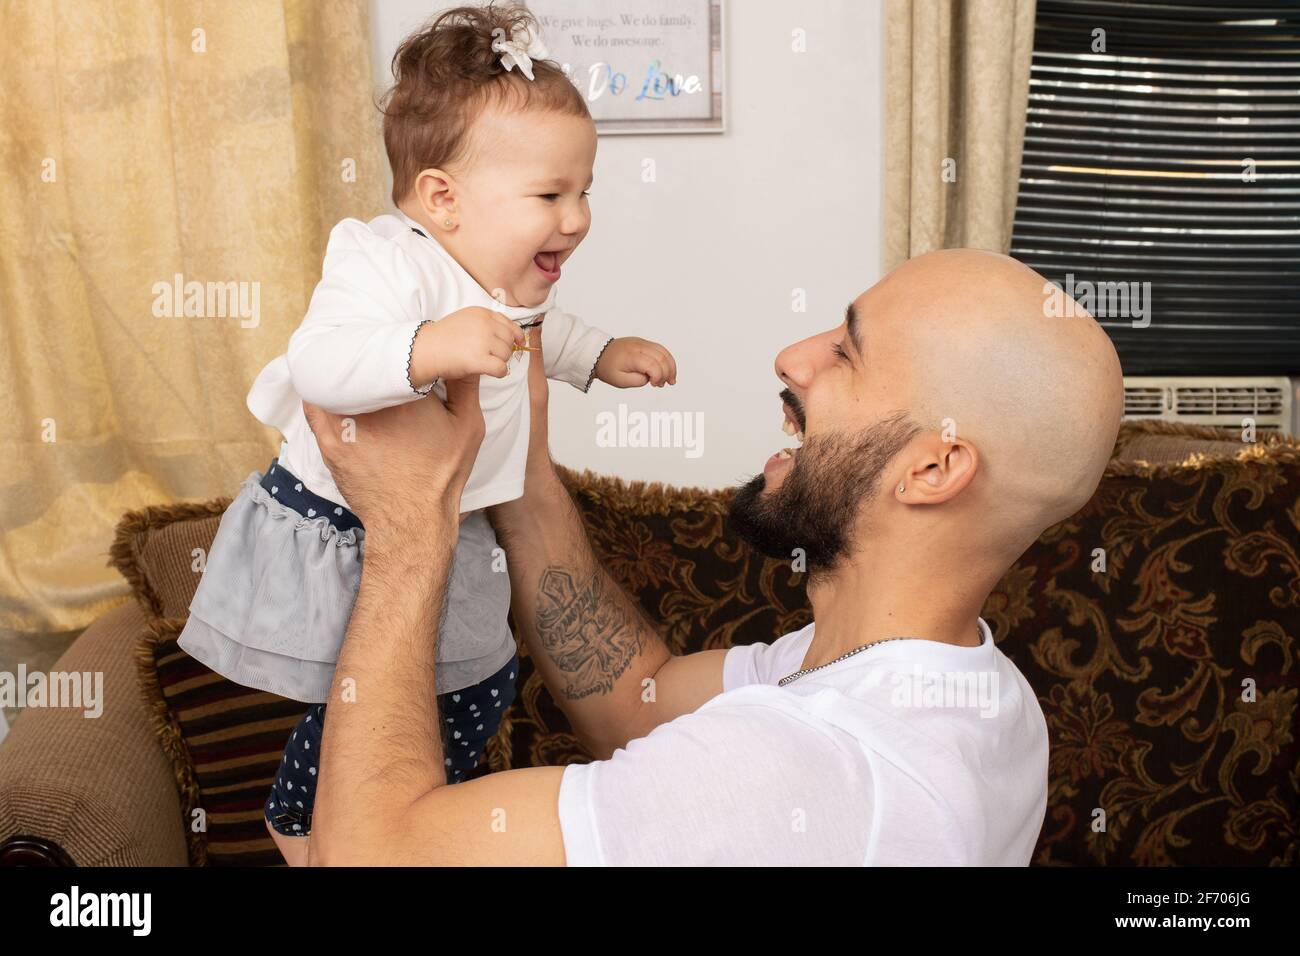 7 month old baby girl, interacting with father, held high Stock Photo